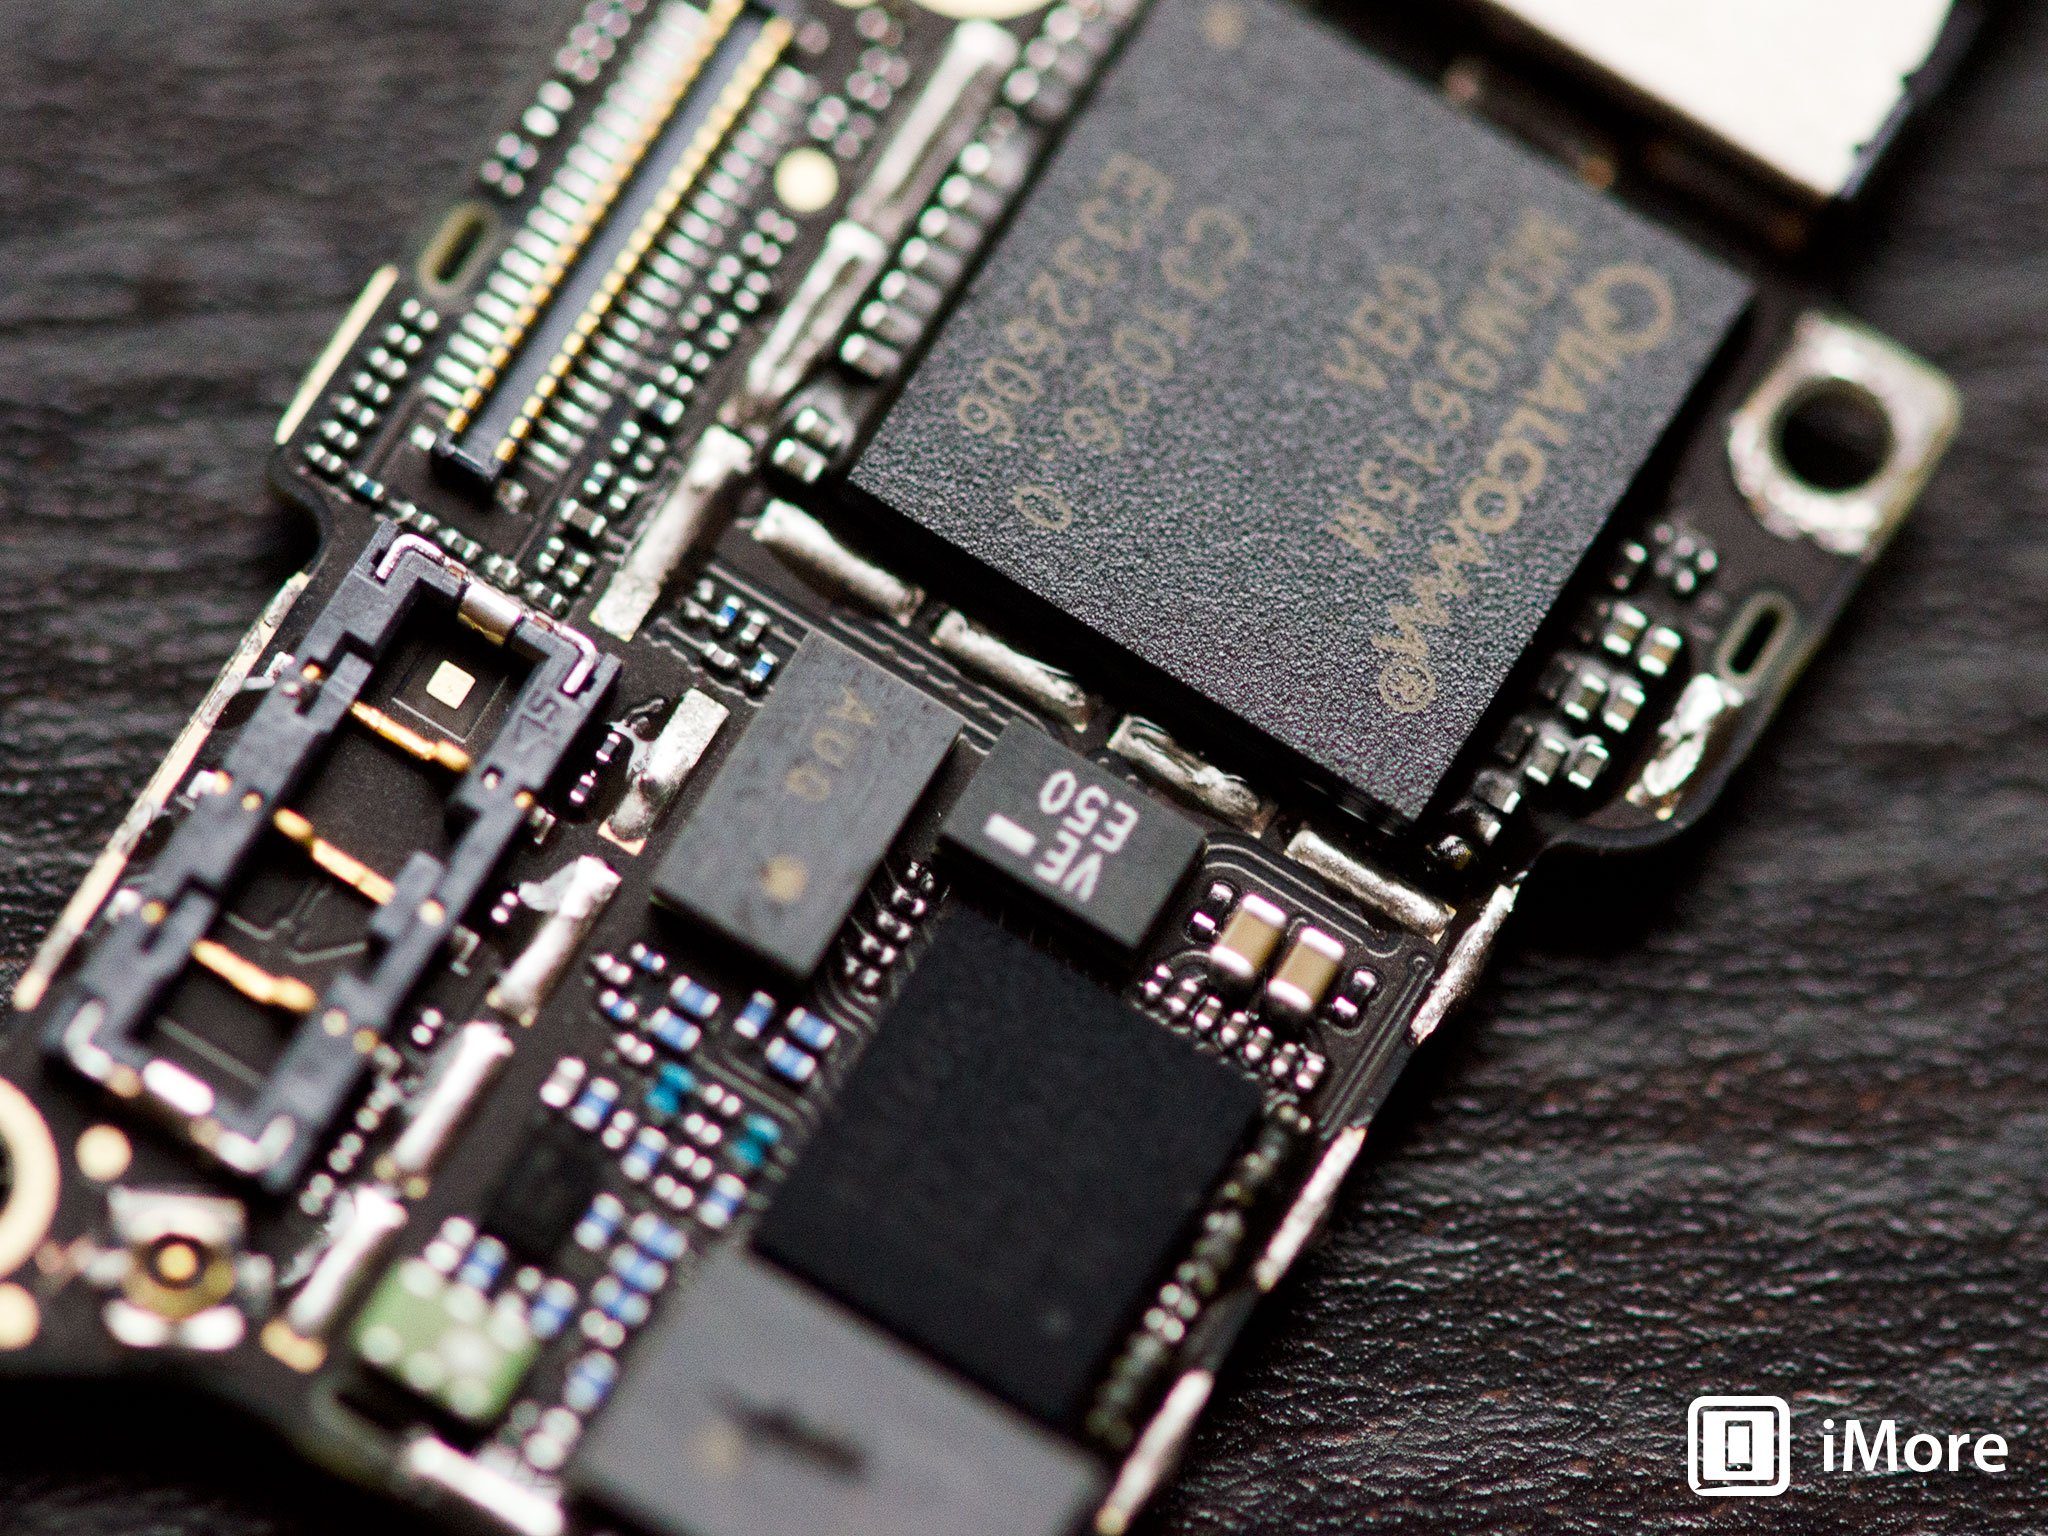 Here we can see the Qualcomm LTE chipset to the top right of the battery connector